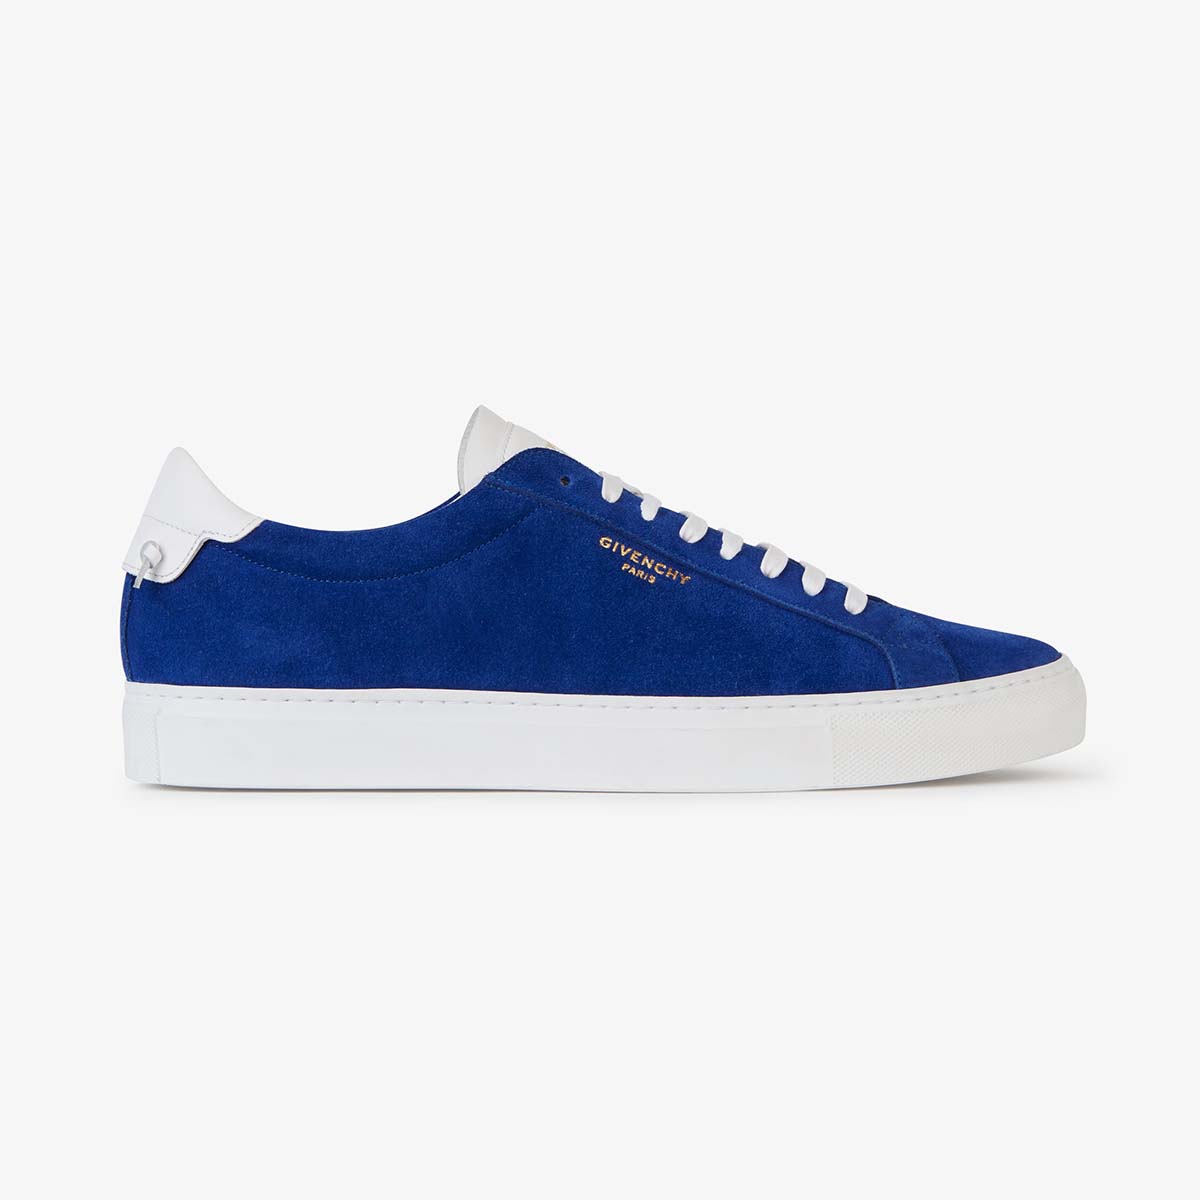 Givenchy Men Low Sneakers in Bicolor Suede Shoes Blue